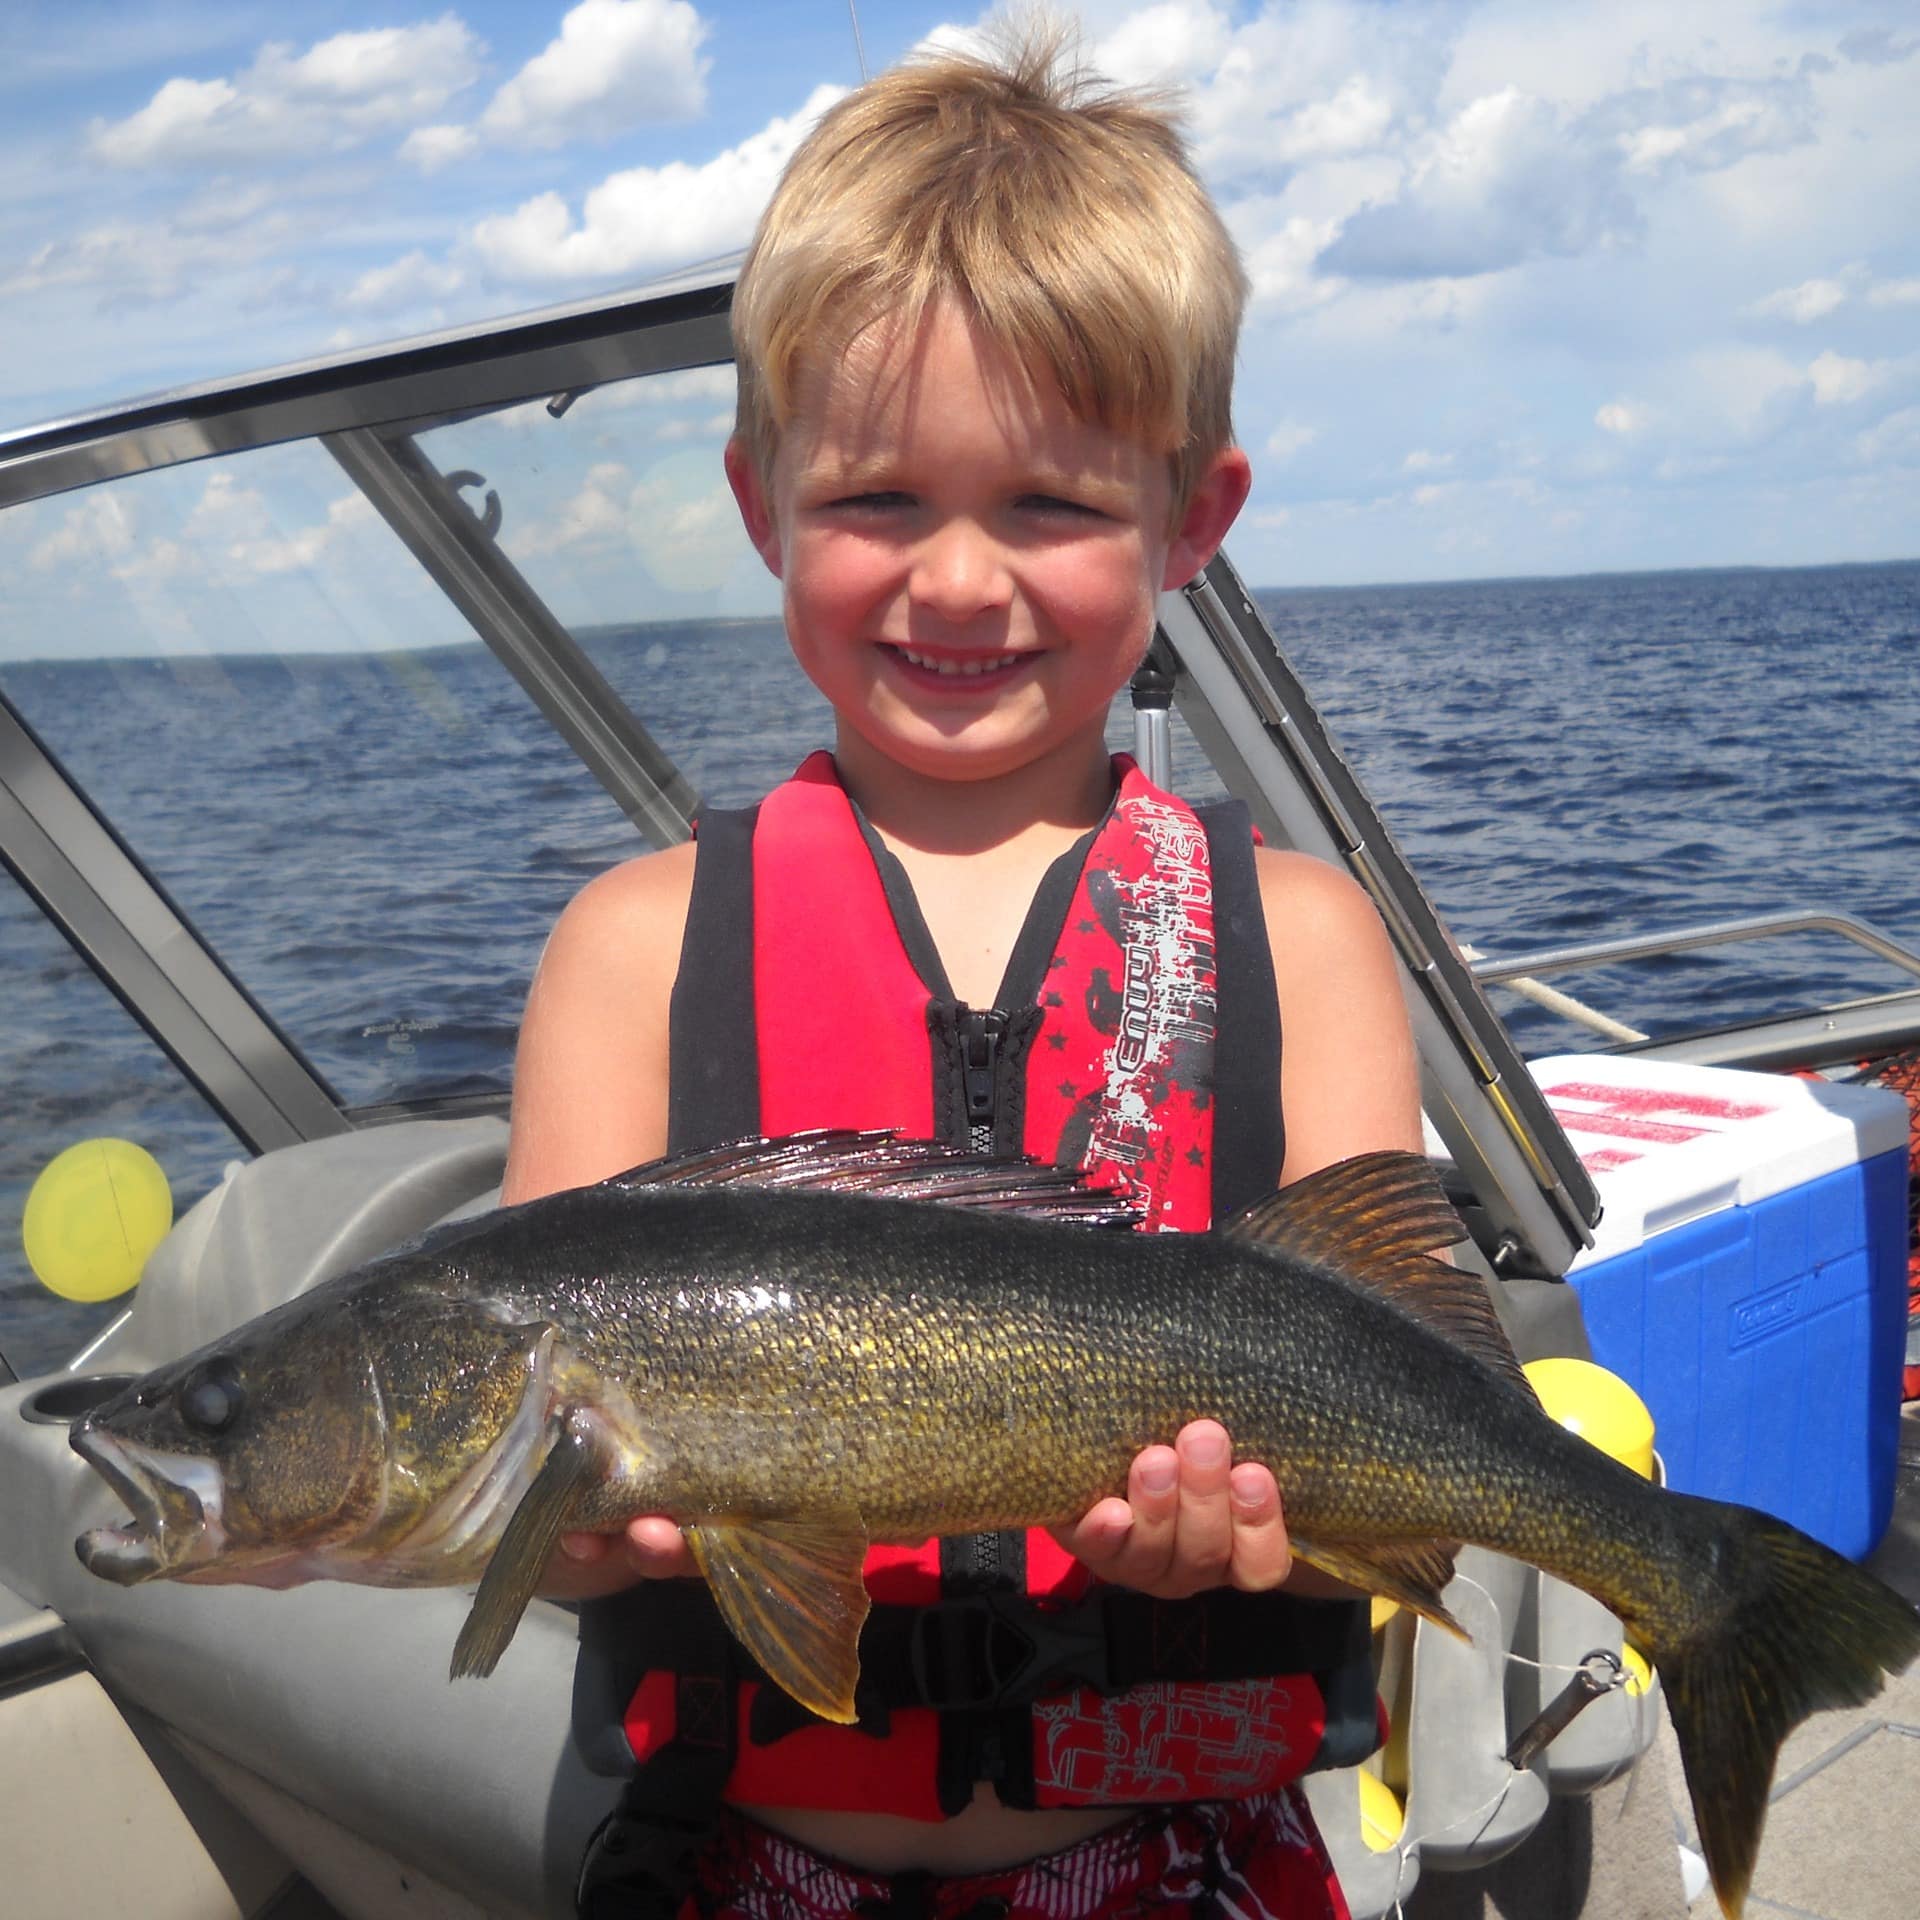 A young boy shows off a fish caught in Rainy Lake